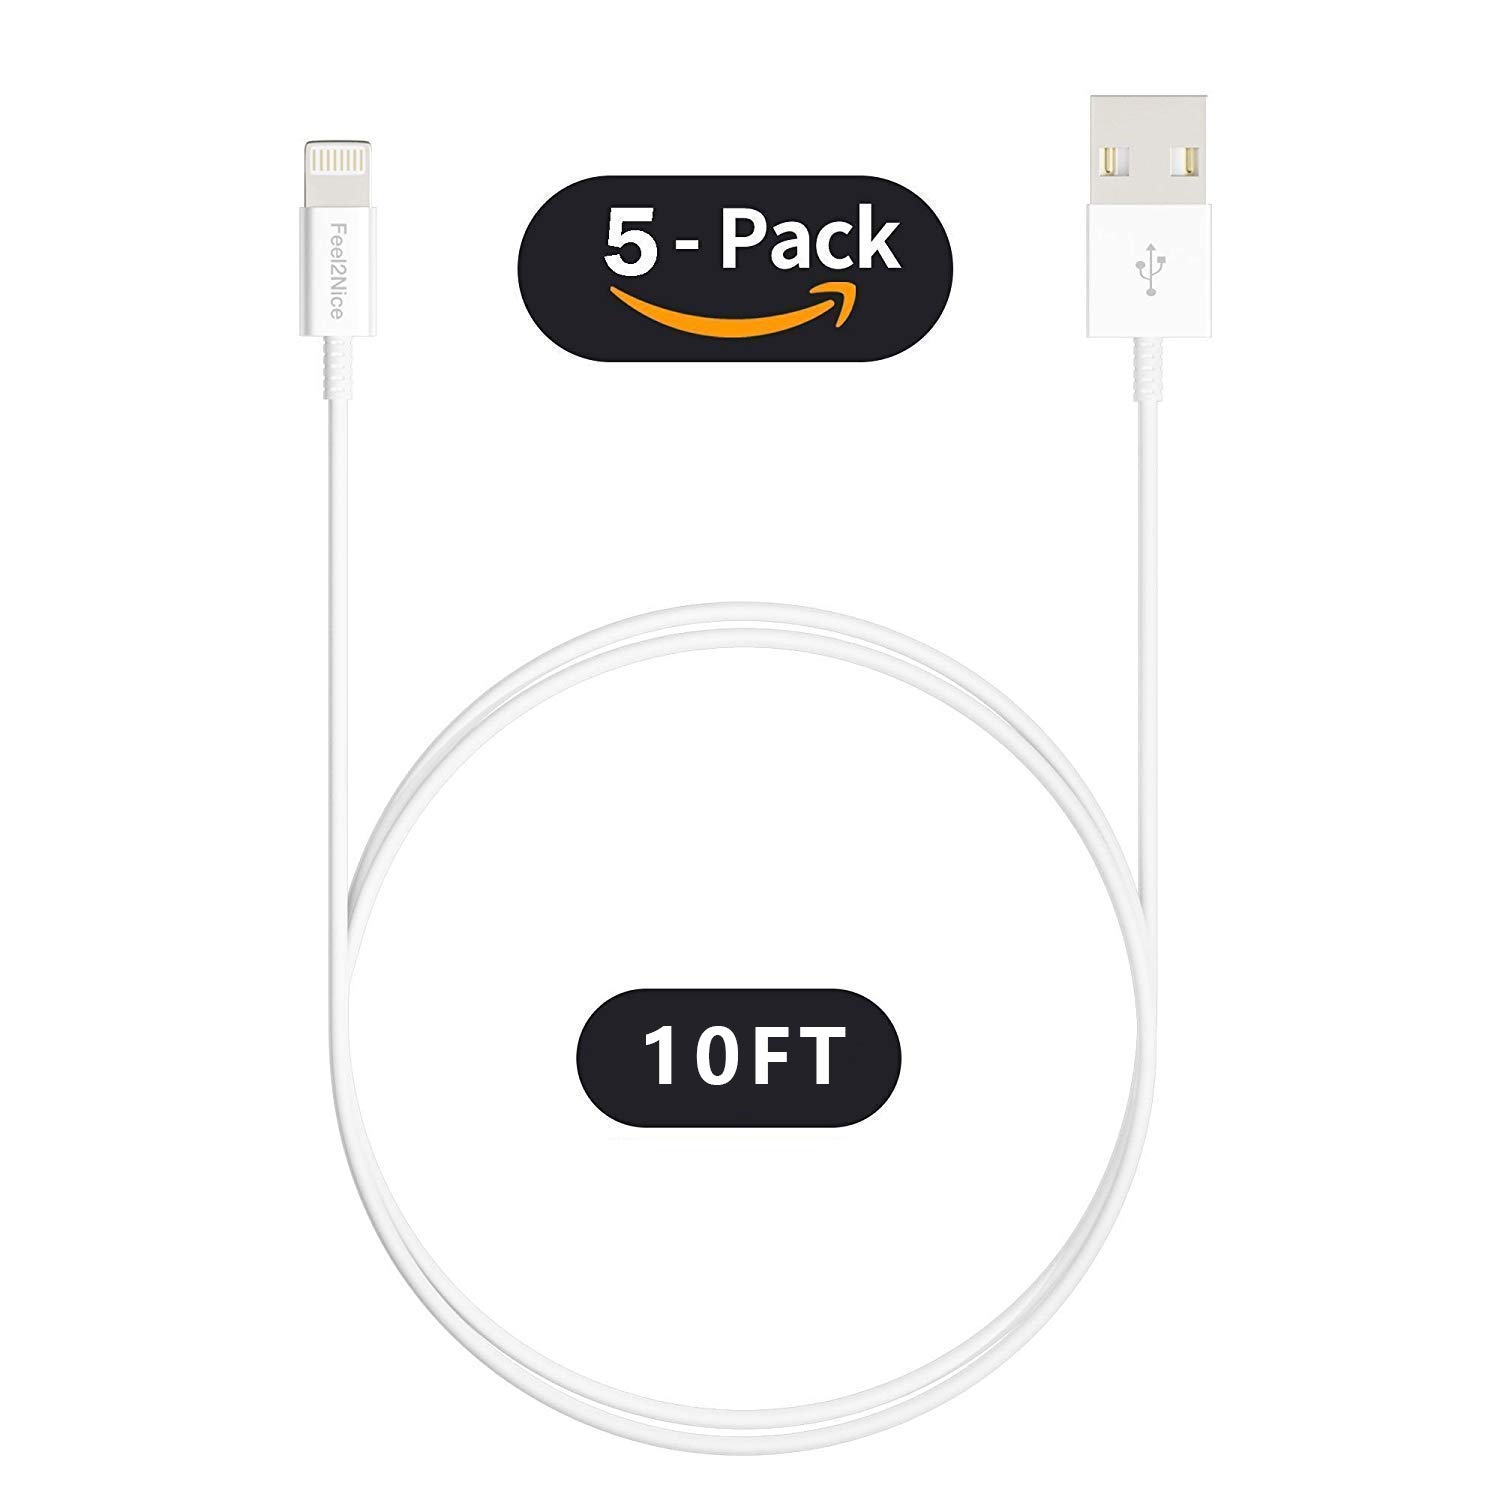 iPhone Charger Fast Charging[Apple MFi Certified] 5pack 10FT Long Lightning Cable Fast High Speed Data Sync iPhone Charger Cord for iPhone 14/13/12/11 Pro Max/XS MAX/XR/XS/X/8/7/Plus airpods (White)